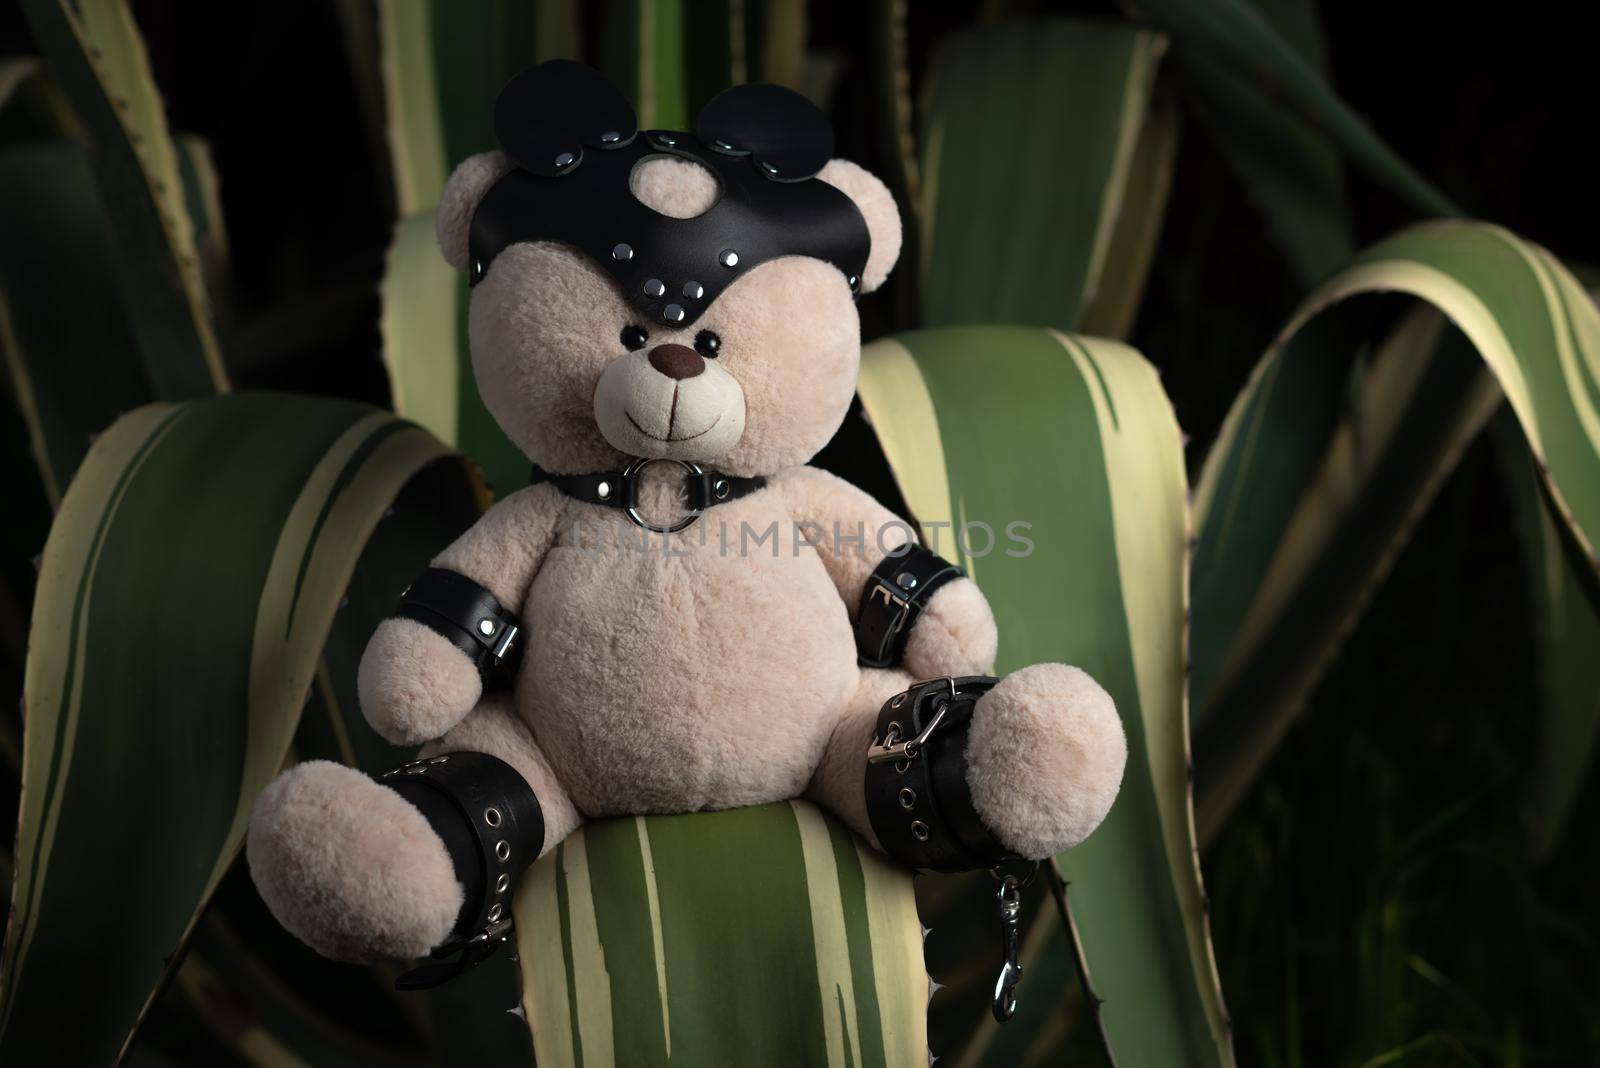 BDSM teddy bear in leather straps and mask accessory for sex games on a prickly southern a cactus